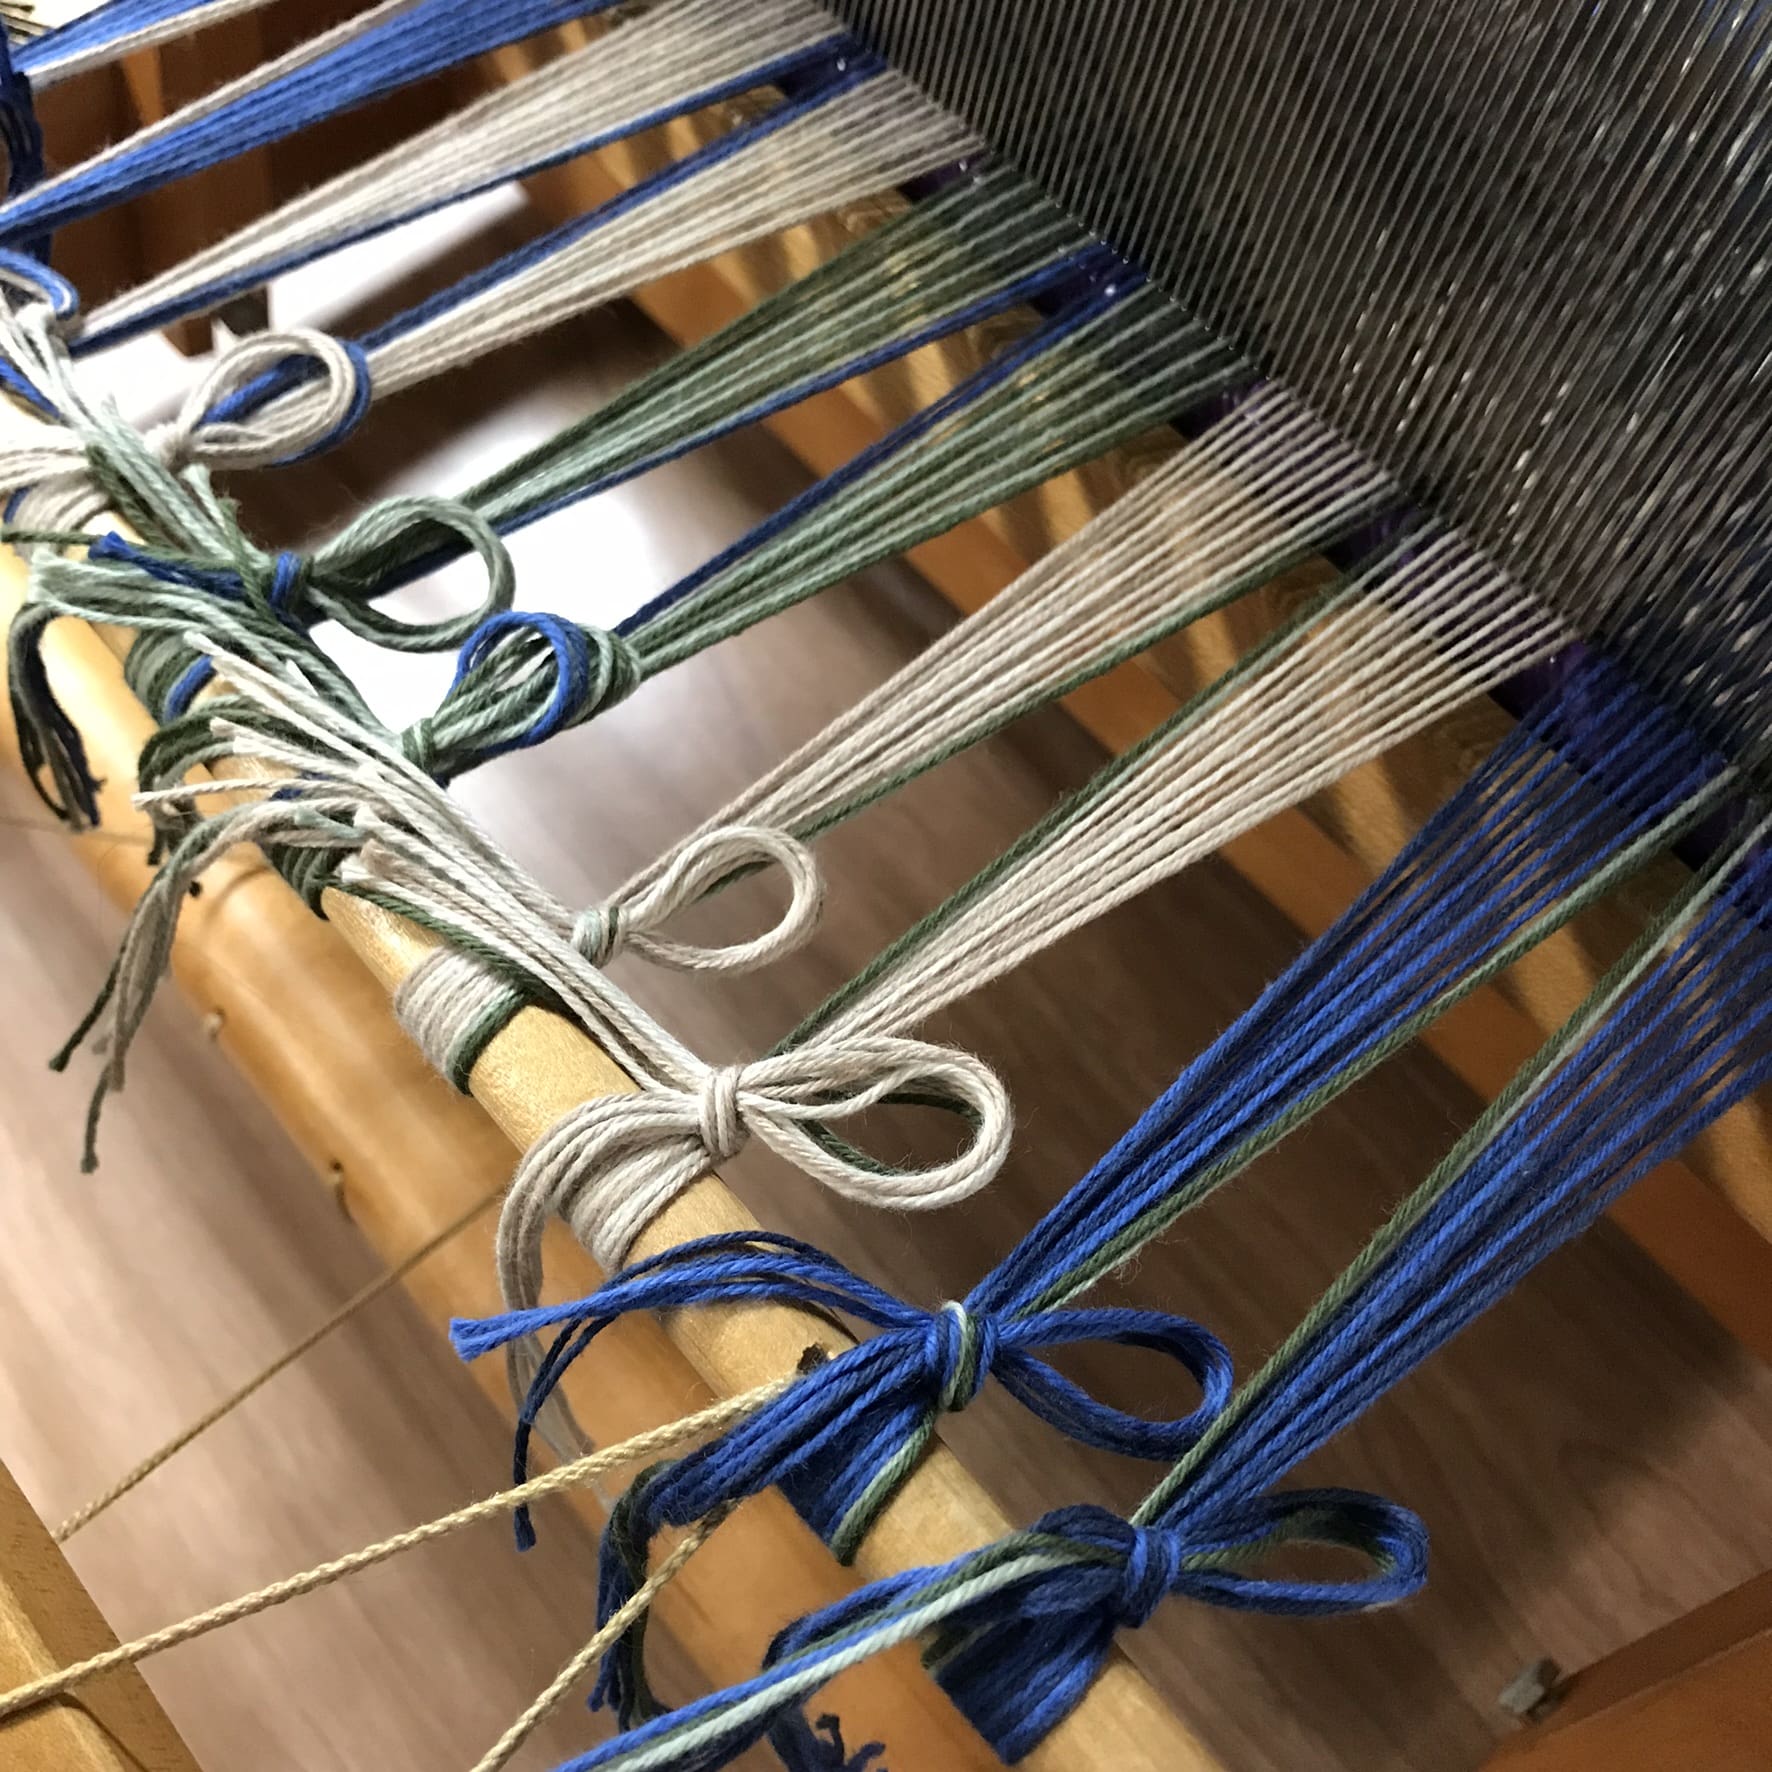 Ready to weave